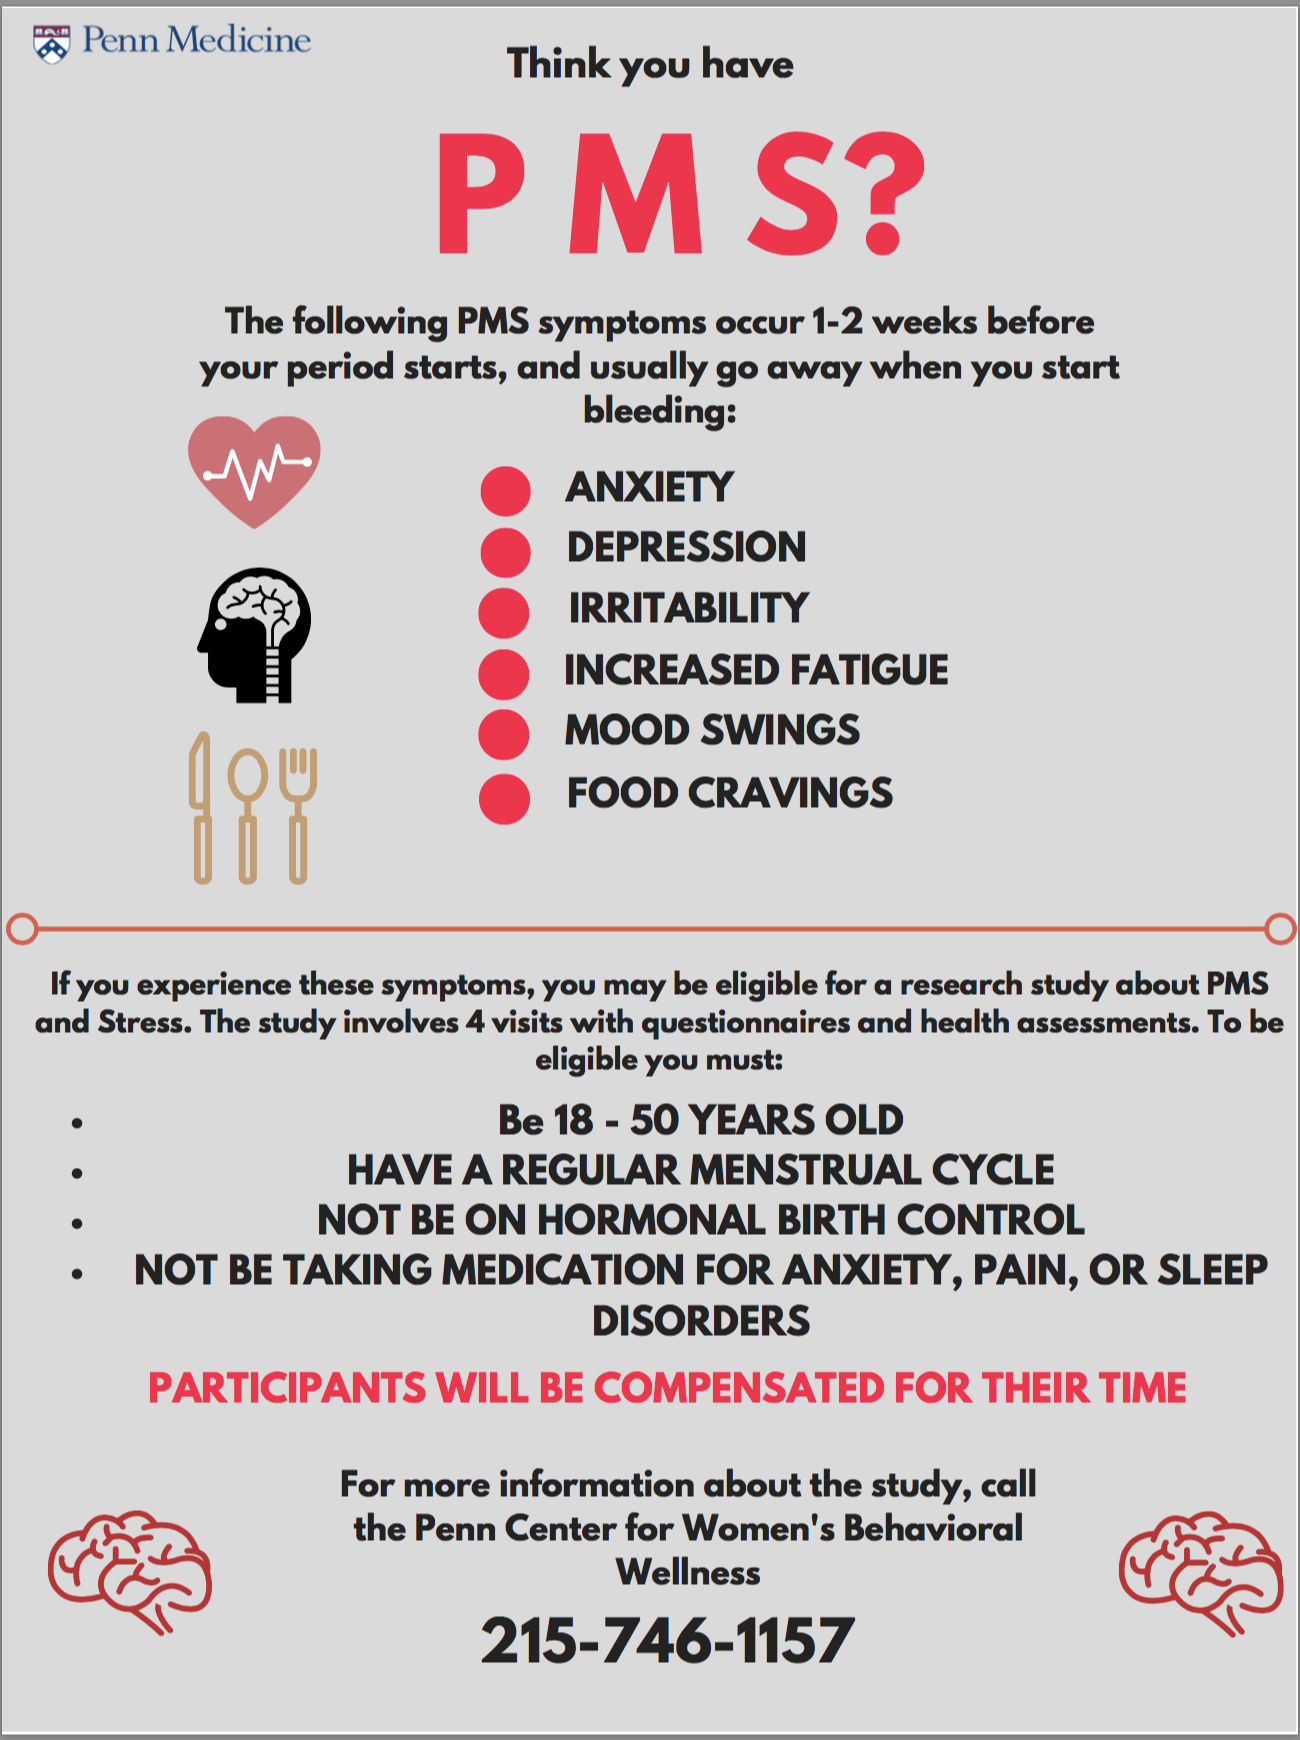 PMS and Stress Study Flyer; see above for text information